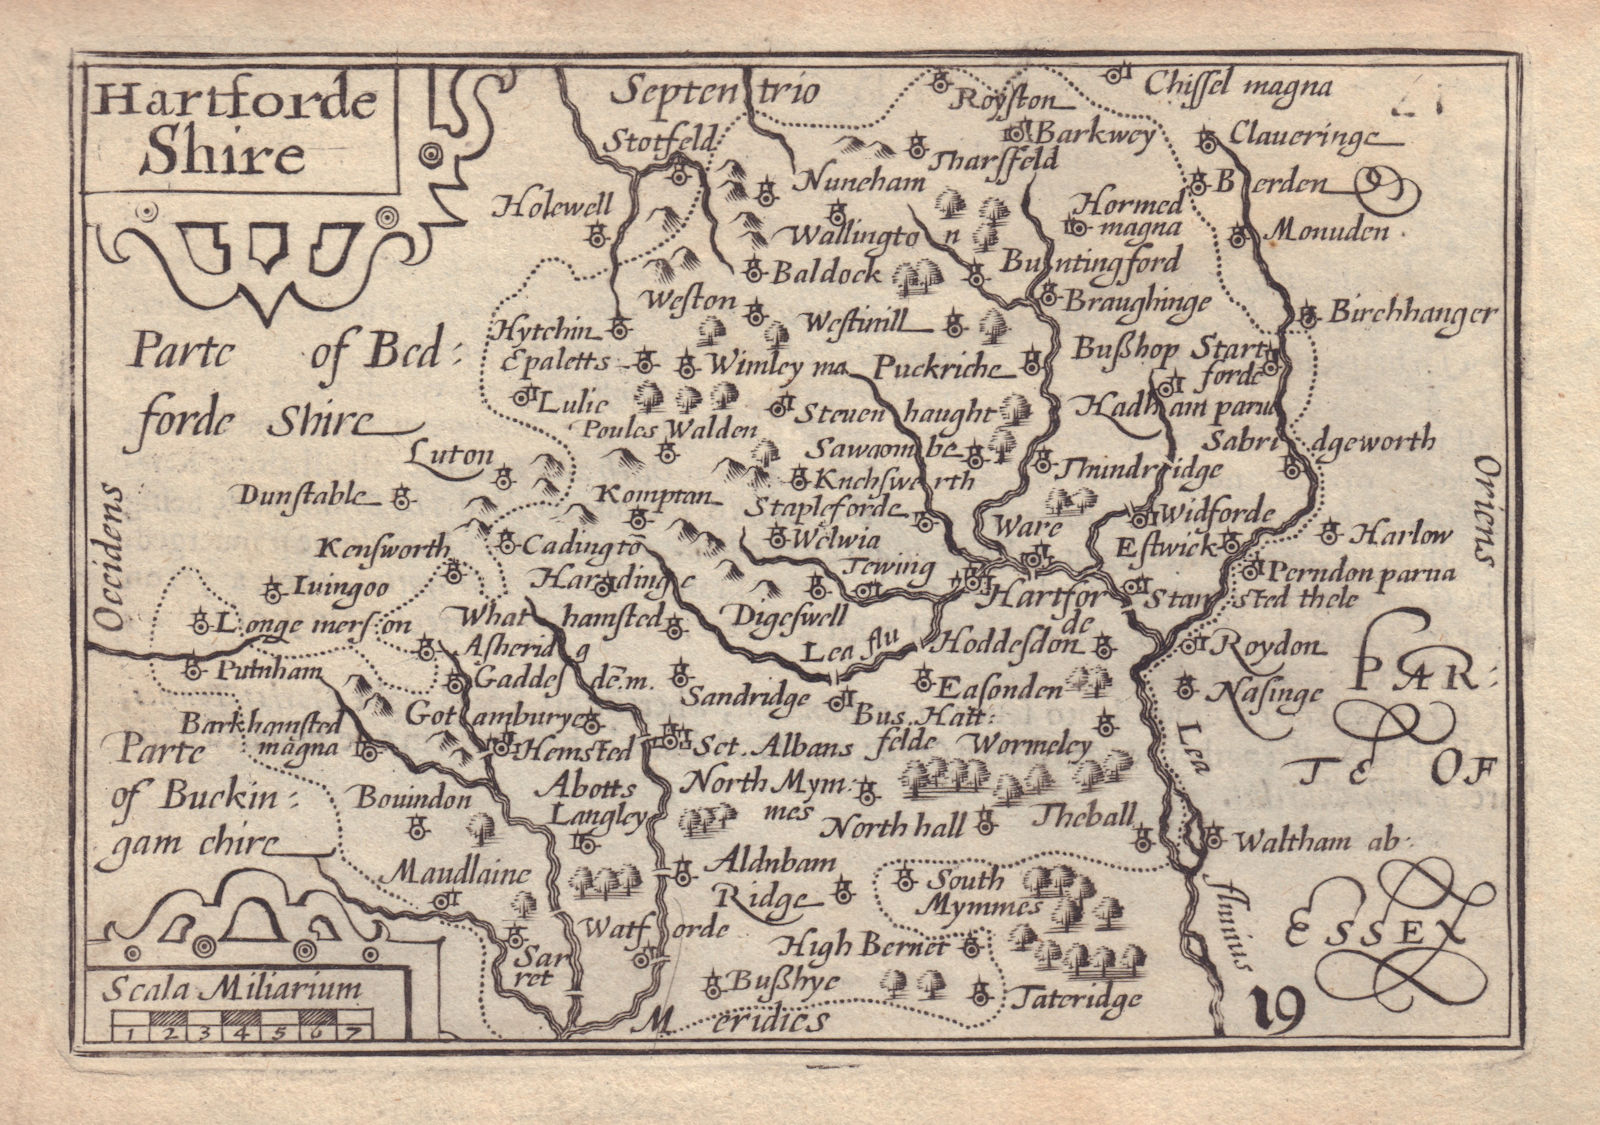 Hartforde Shire by Keere. "Speed miniature" Hertfordshire county map 1632